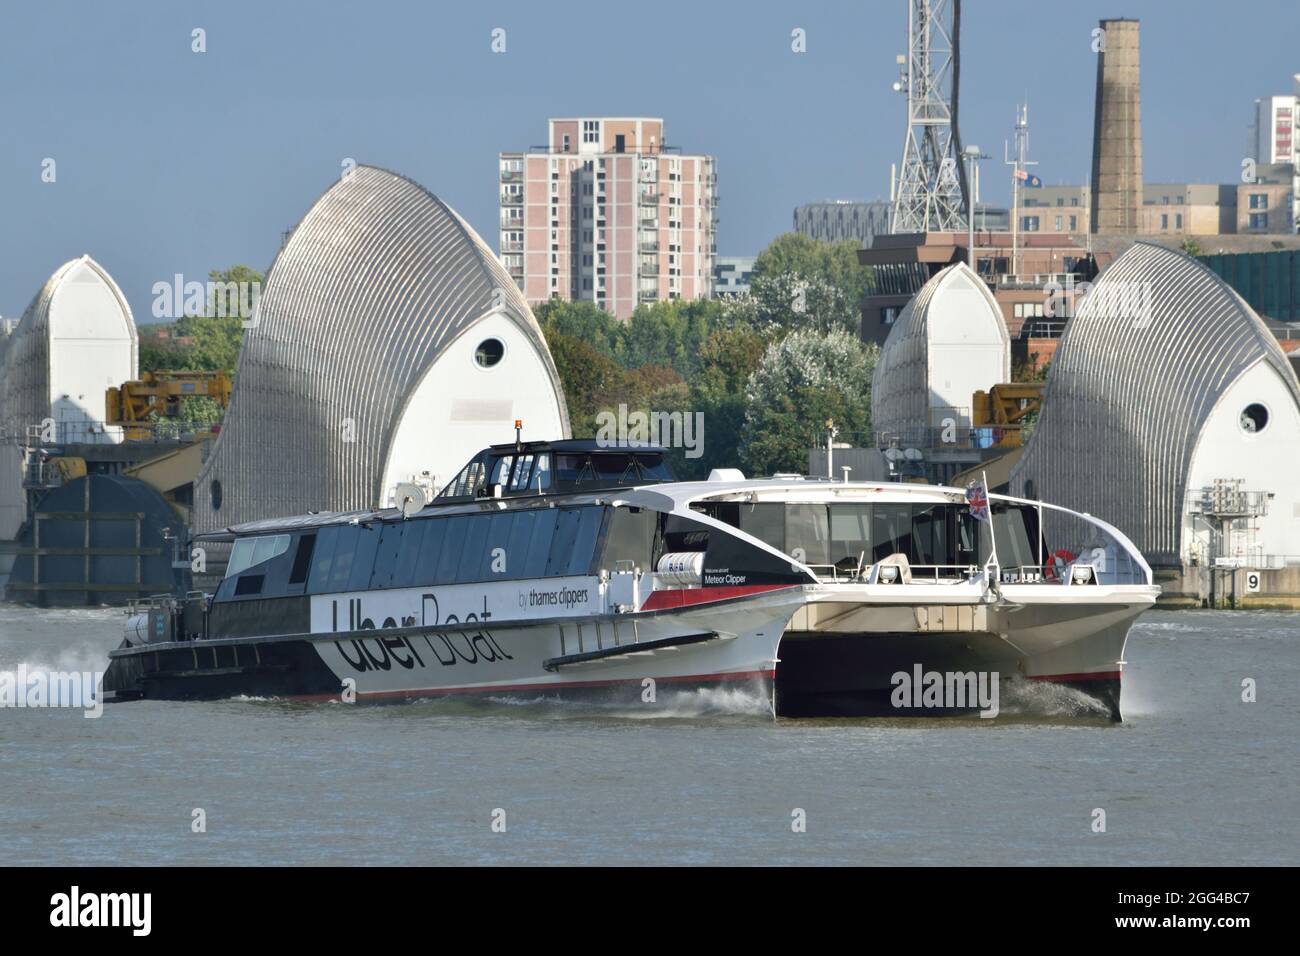 Uber Boat by Thames Clipper River Bus Service-Schiff Meteor Clipper, das den RB1 River Bus Service auf der Themse in London betreibt Stockfoto